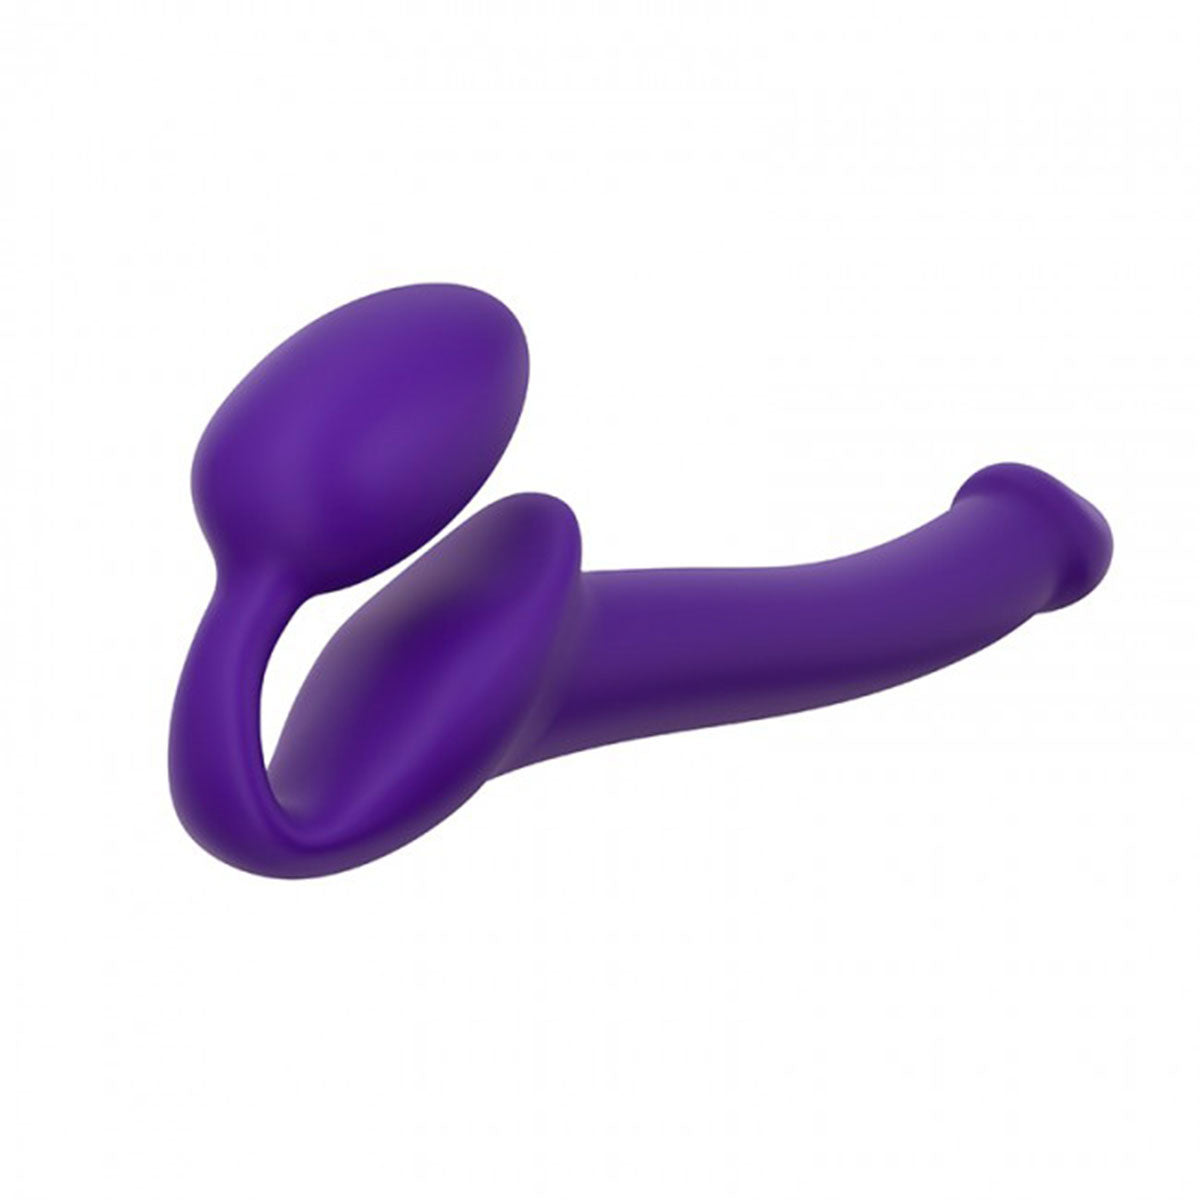 Strap-on-Me Purple - Assorted Sizes